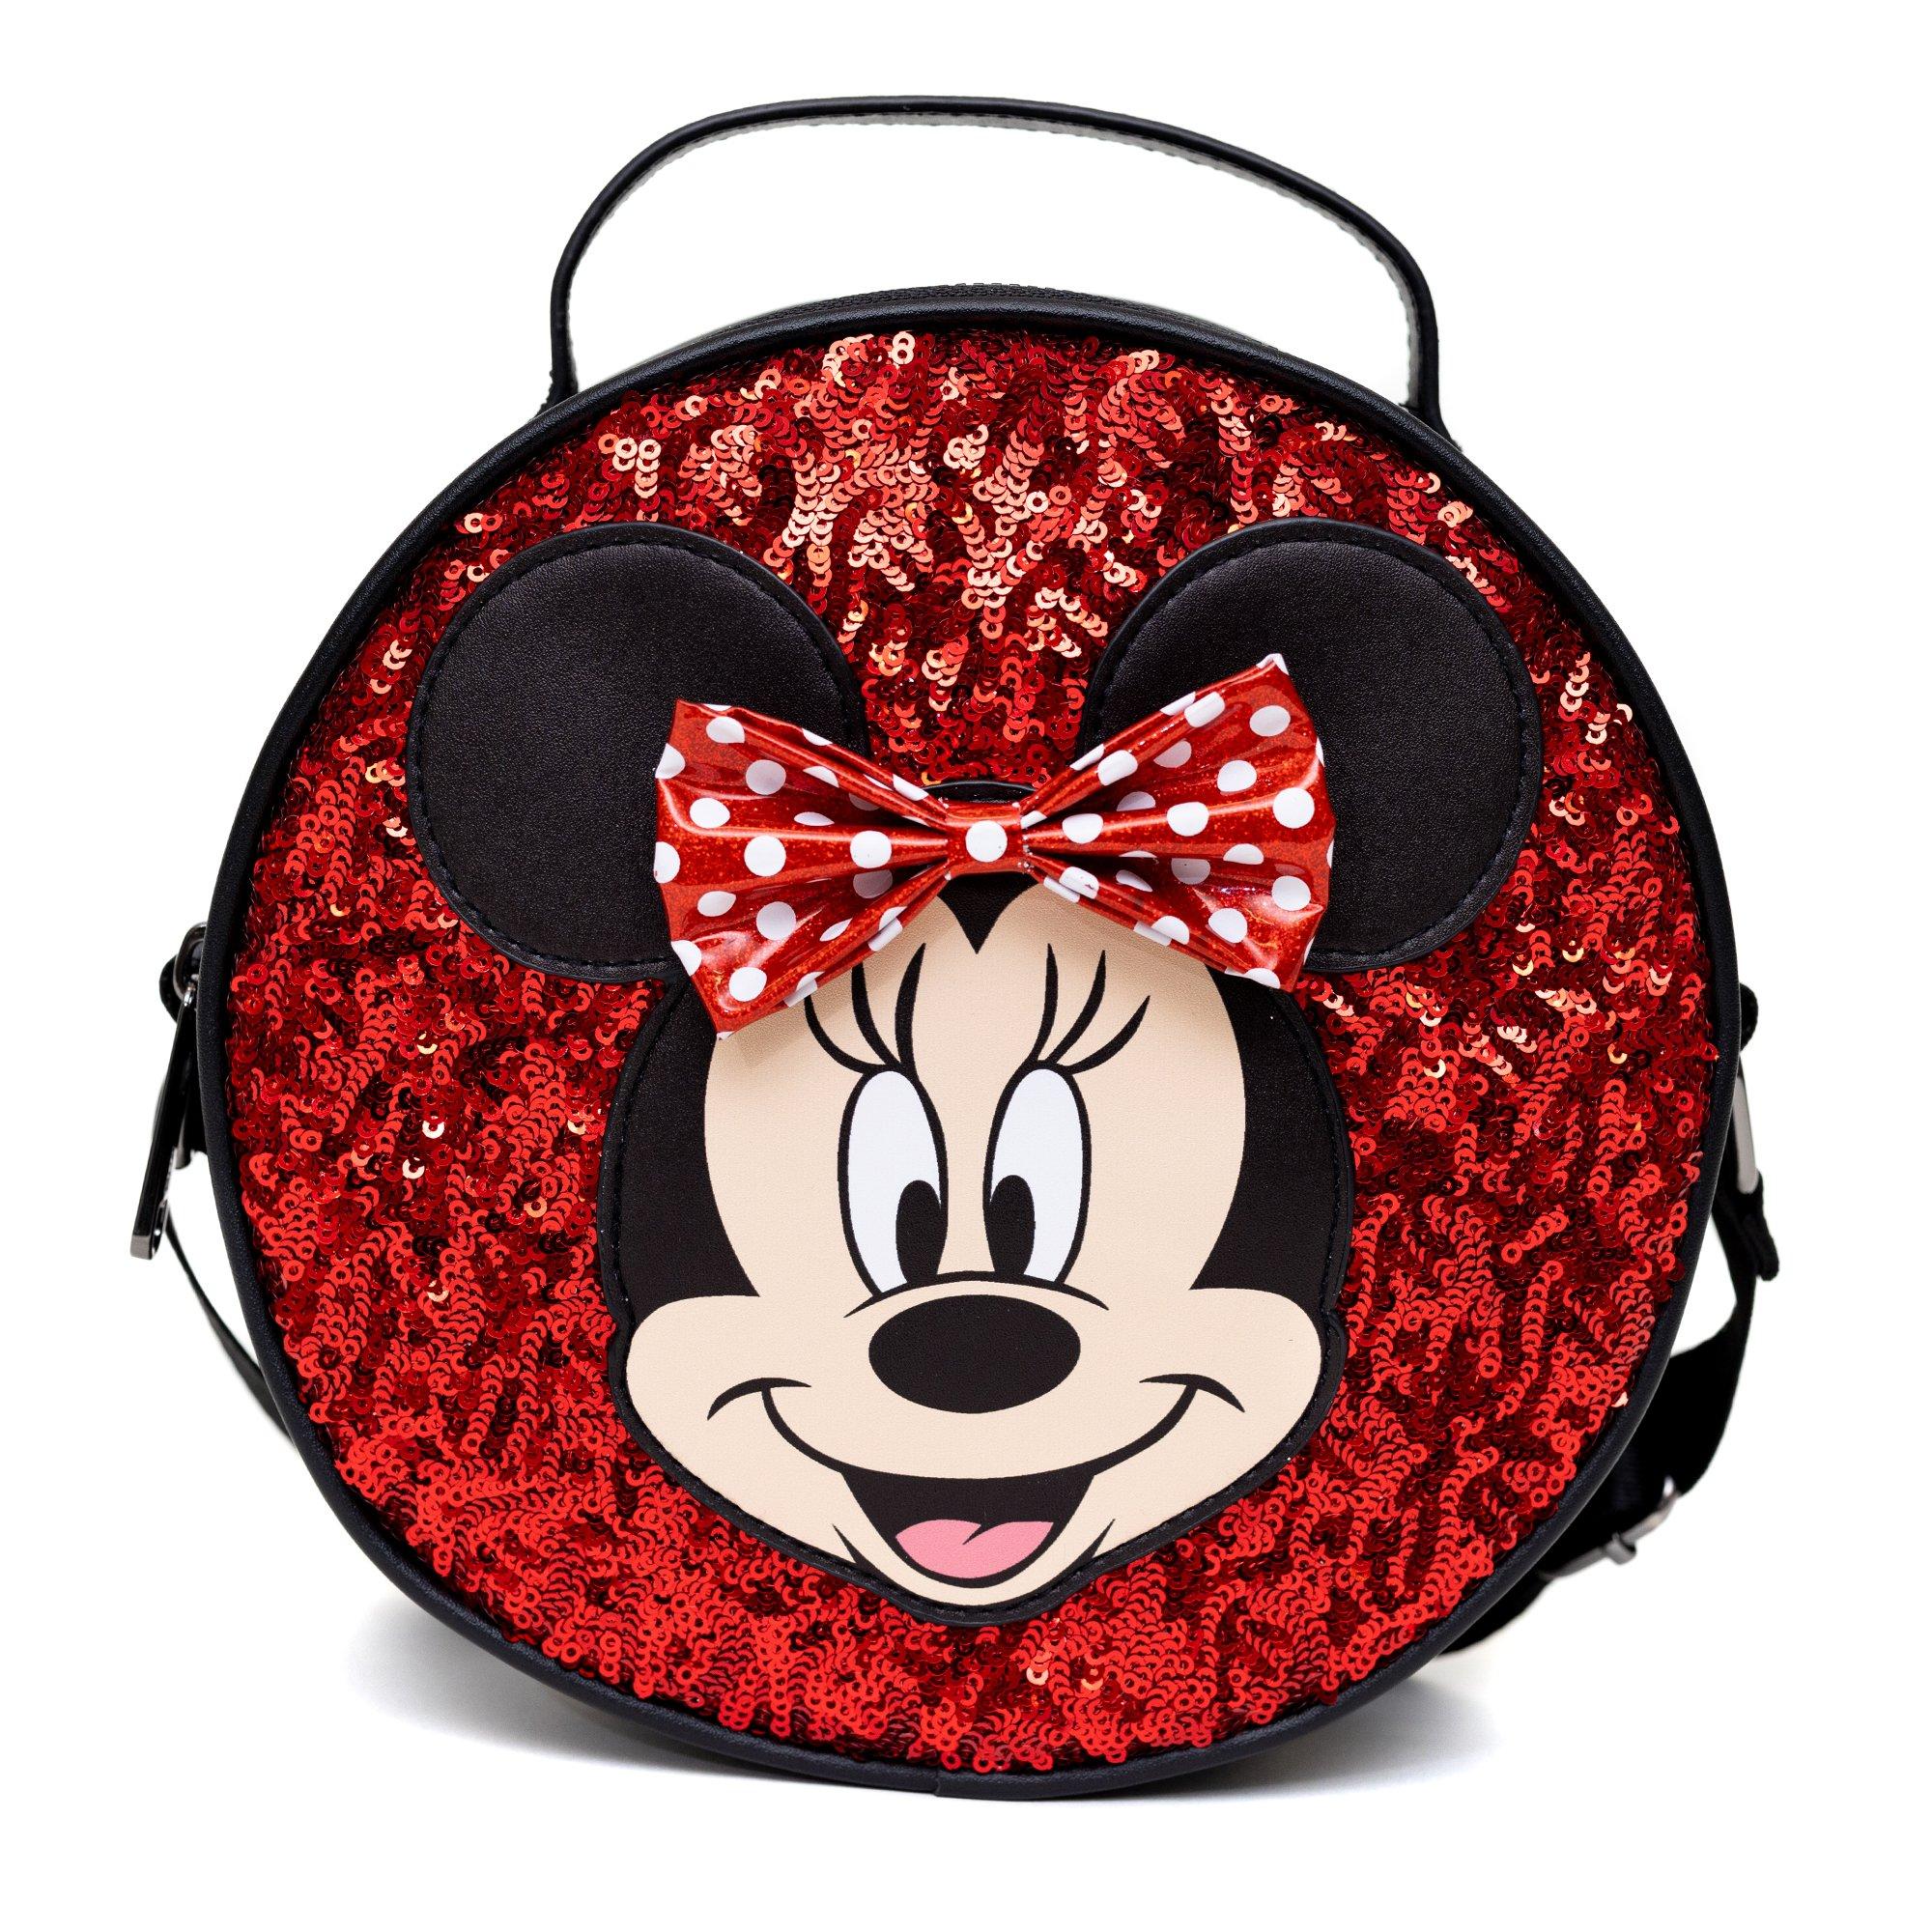 Disney Cross Body Bag for Women, Red Minnie Mouse Bag,Disney Gifts for  Women